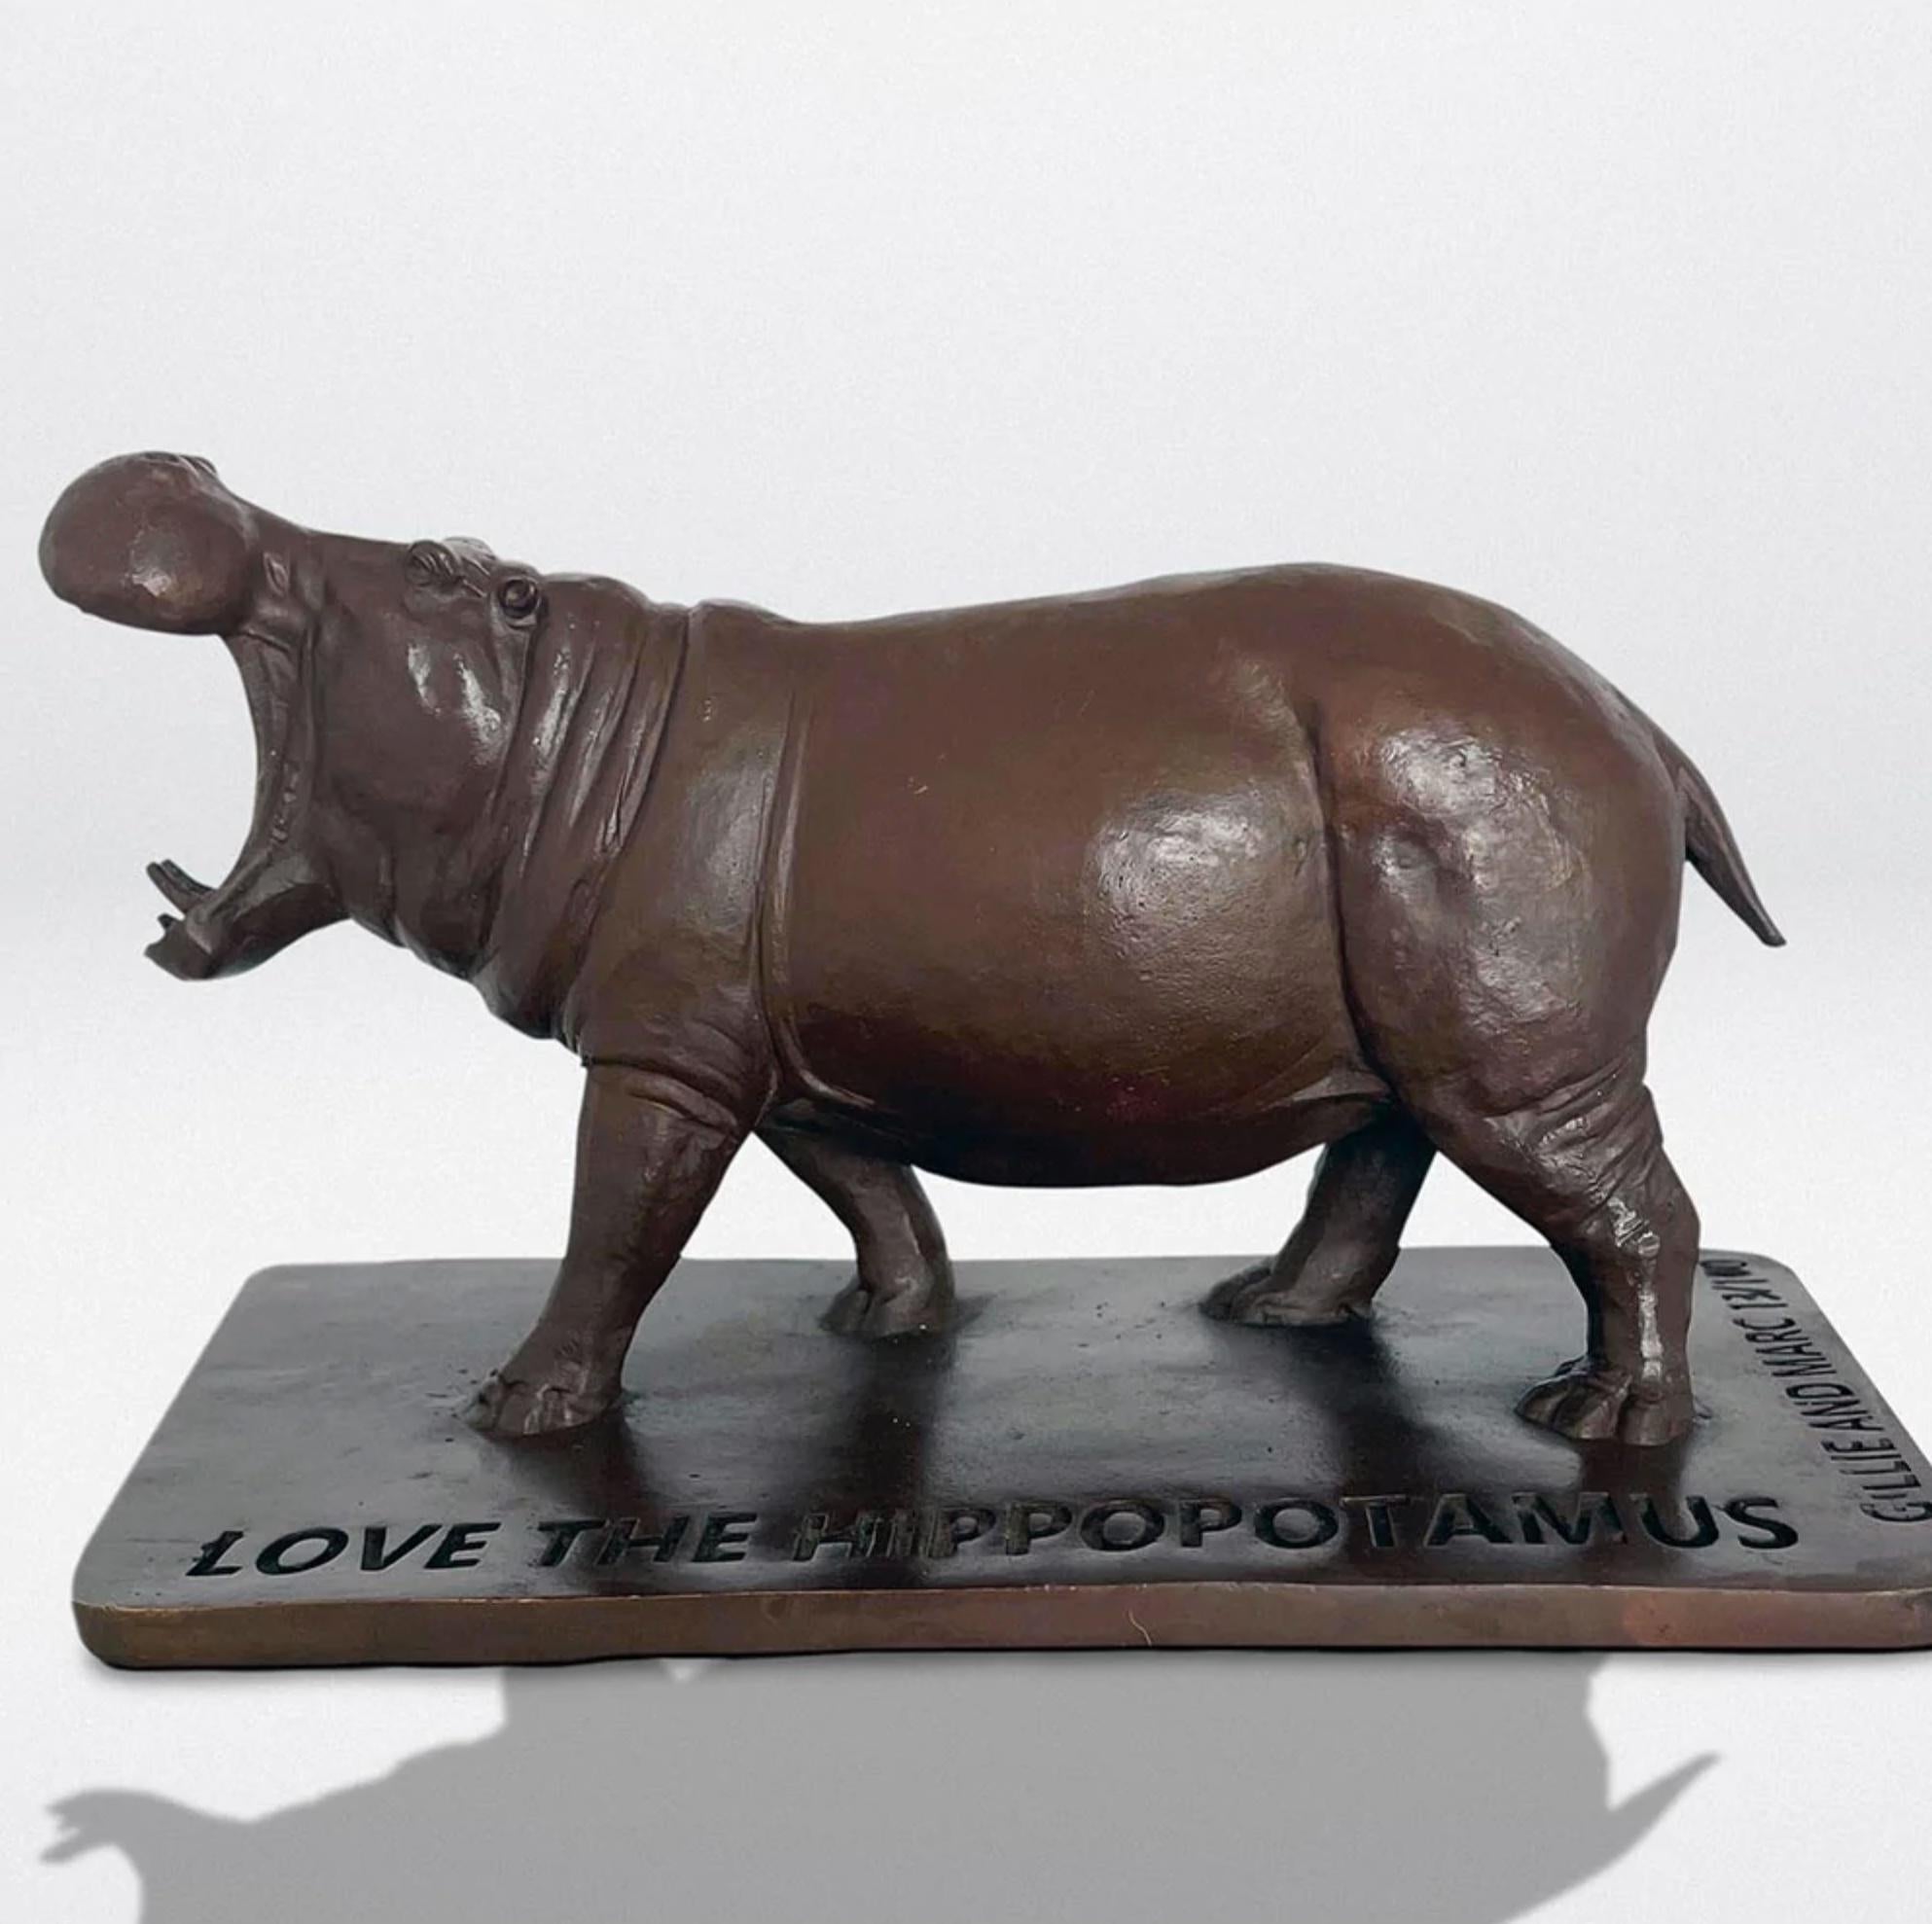 Gillie and Marc Schattner Figurative Sculpture - Authentic Bronze Love the Hippopotamus Sculpture by Gillie and Marc